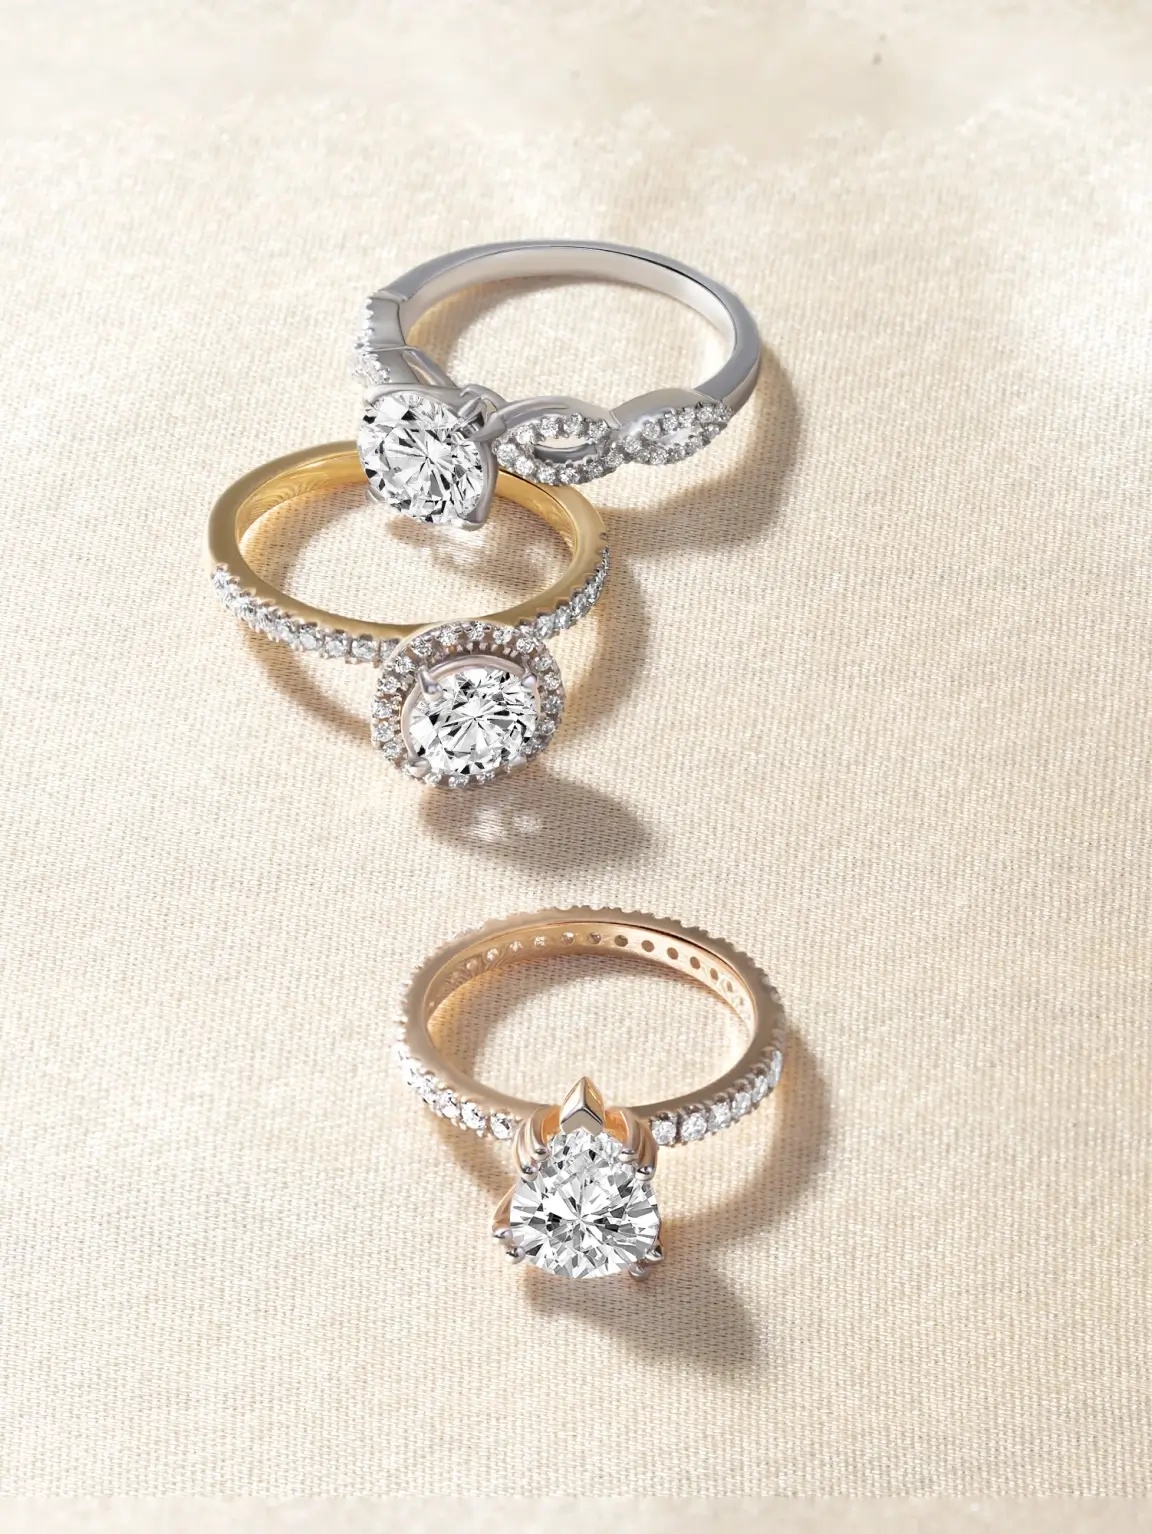 Classic Engagement Rings: A Timeless Choice